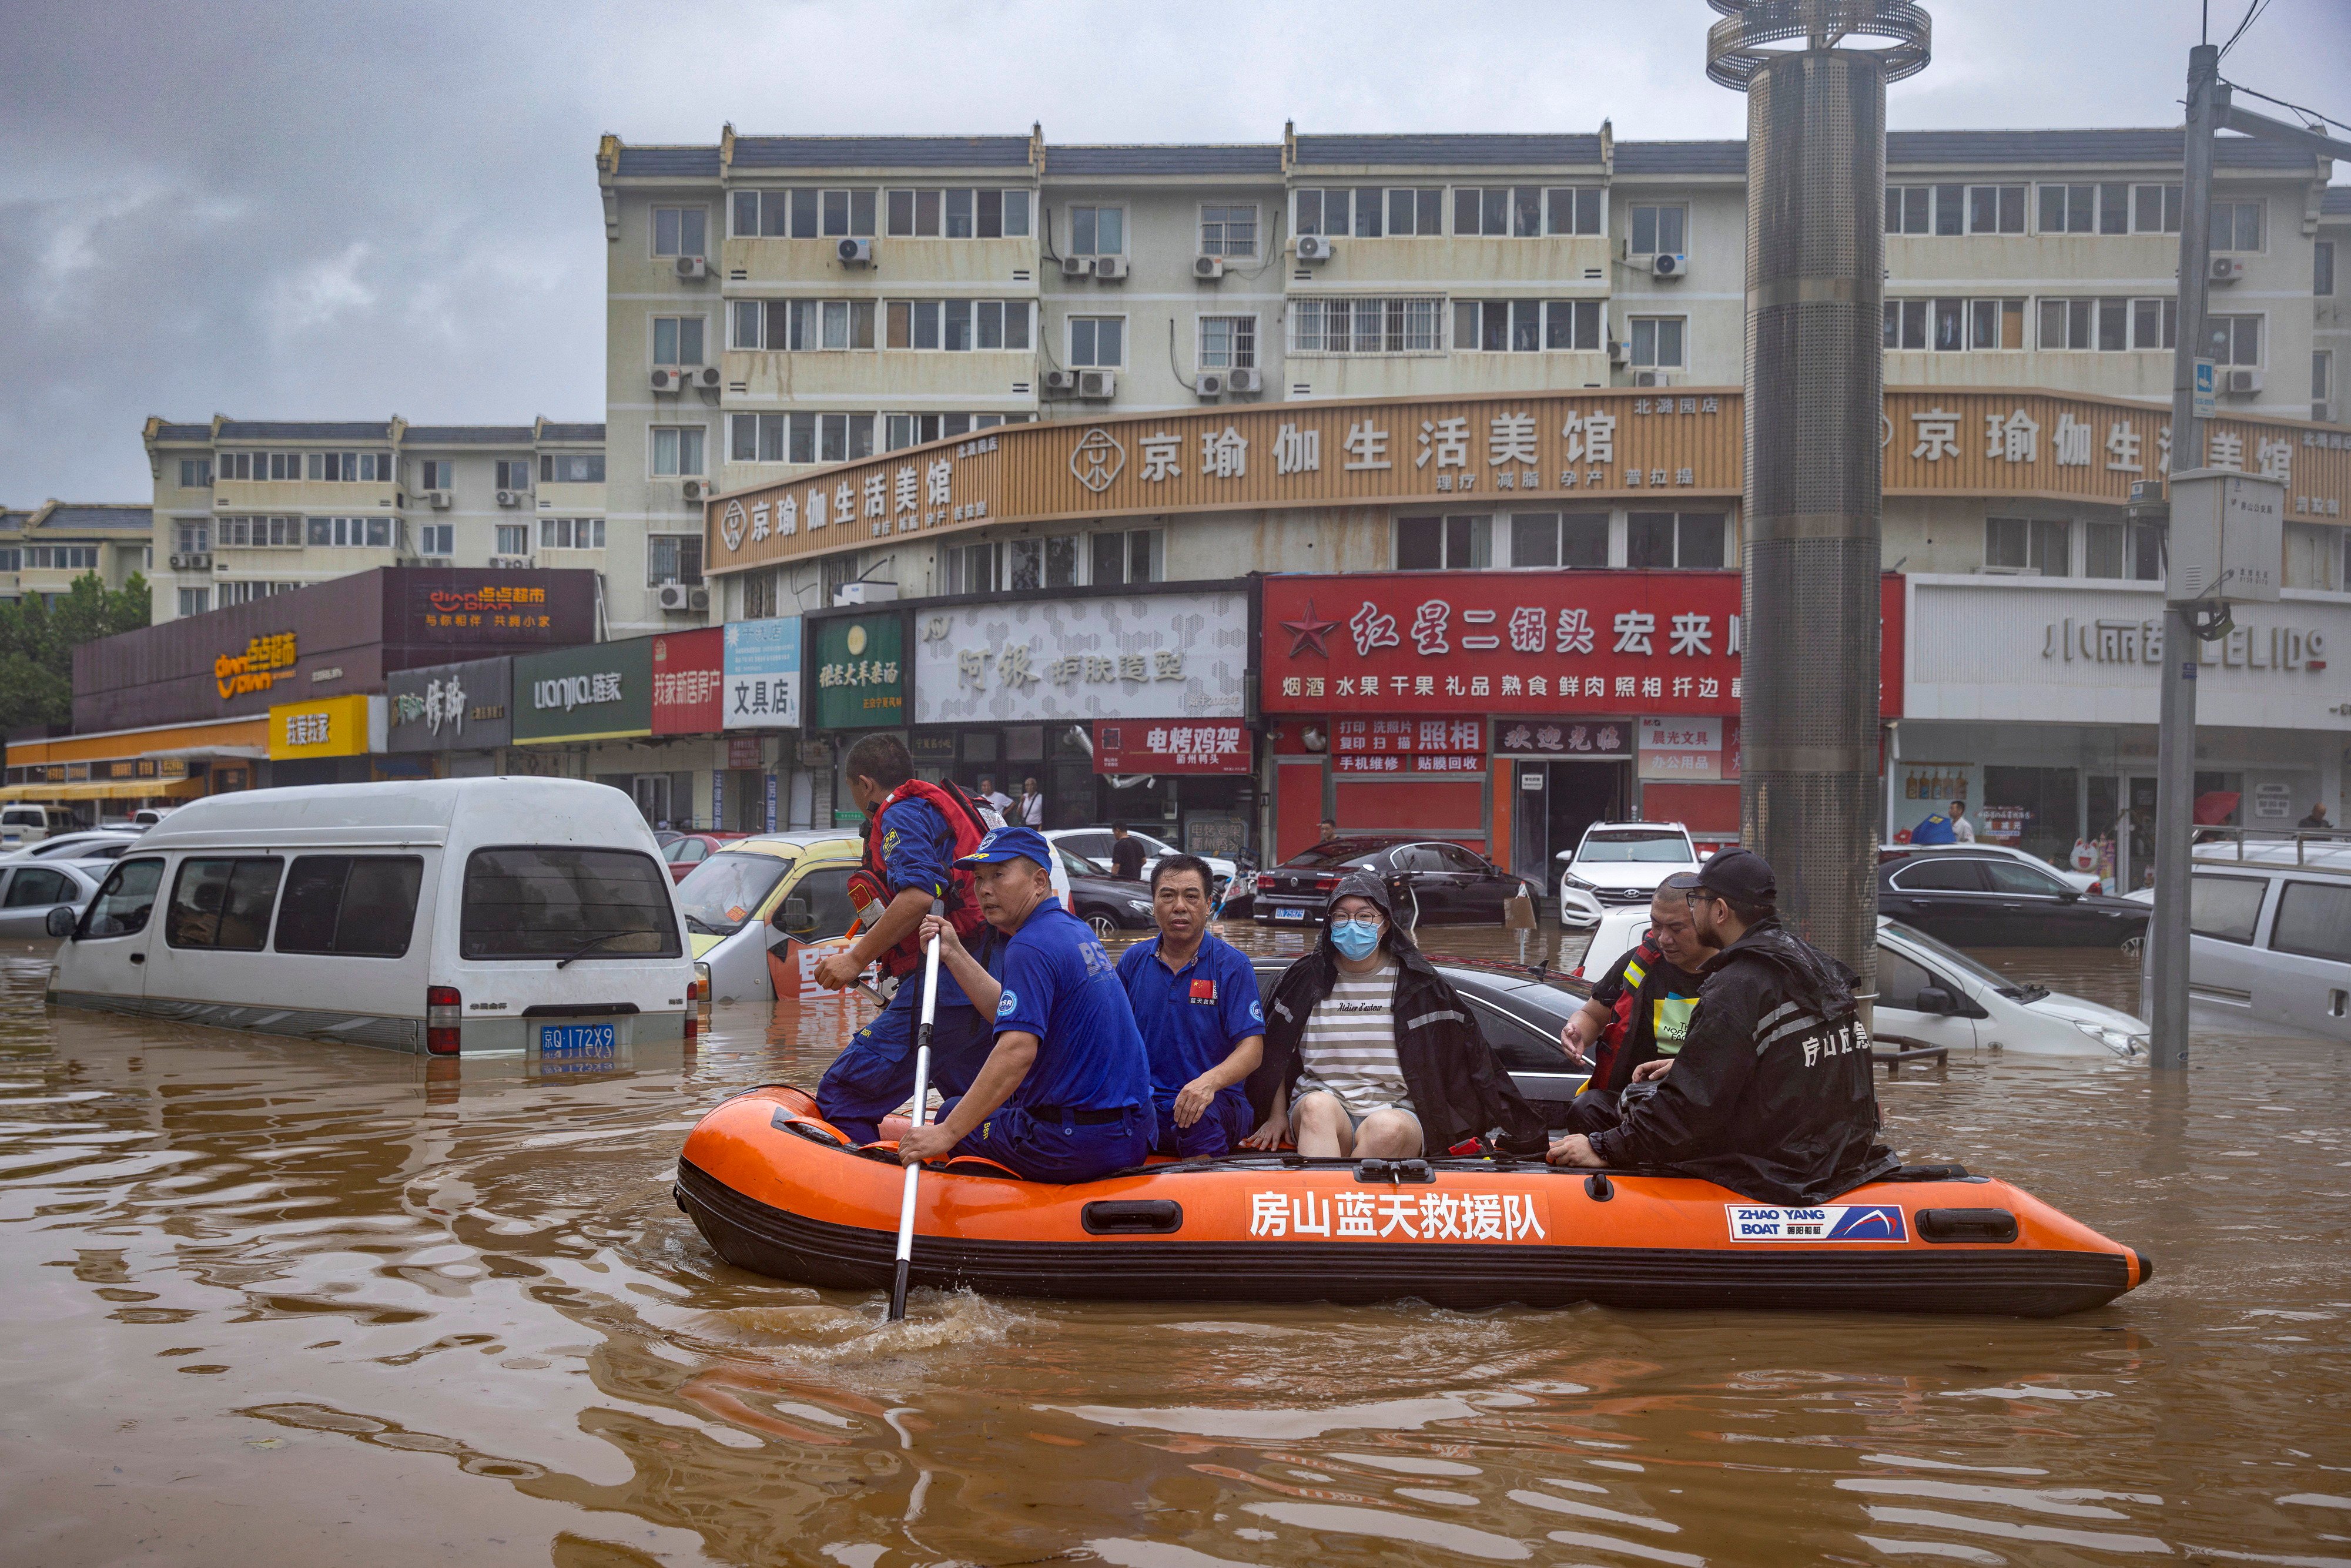 Rescuers paddle through a Beijing neighbourhood on August 1 after the Chinese capital was hit by heavy rain in the wake of Typhoon Doksuri. Photo: Reuters